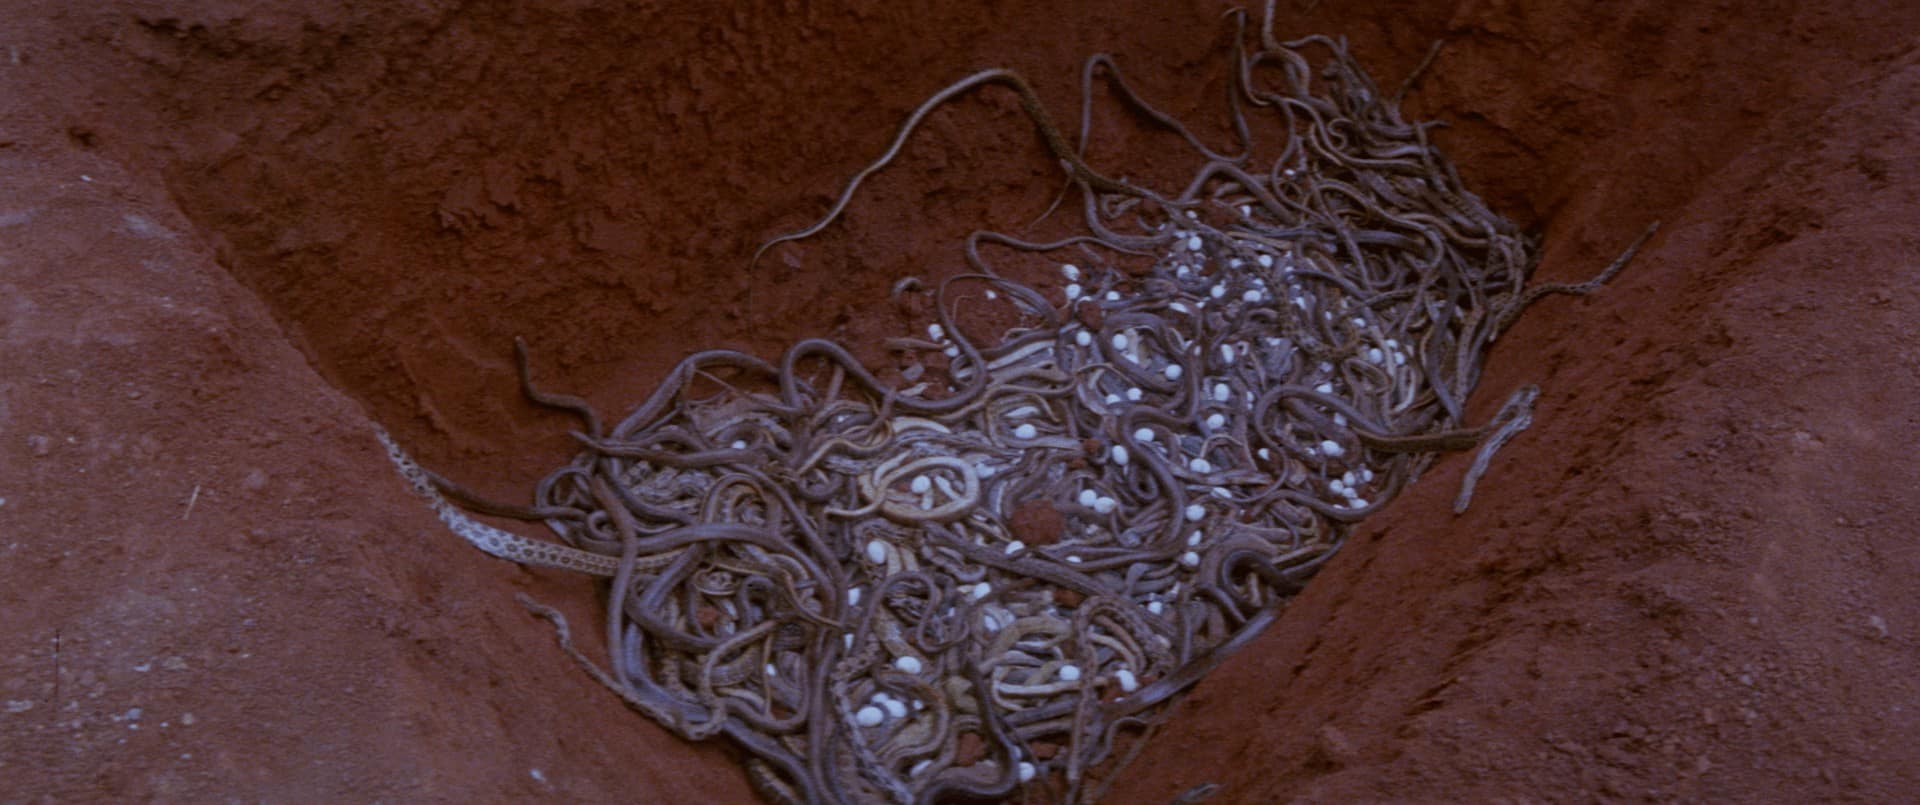 Calamity of Snakes (1982) [Unearthed Films Blu-ray review] 18